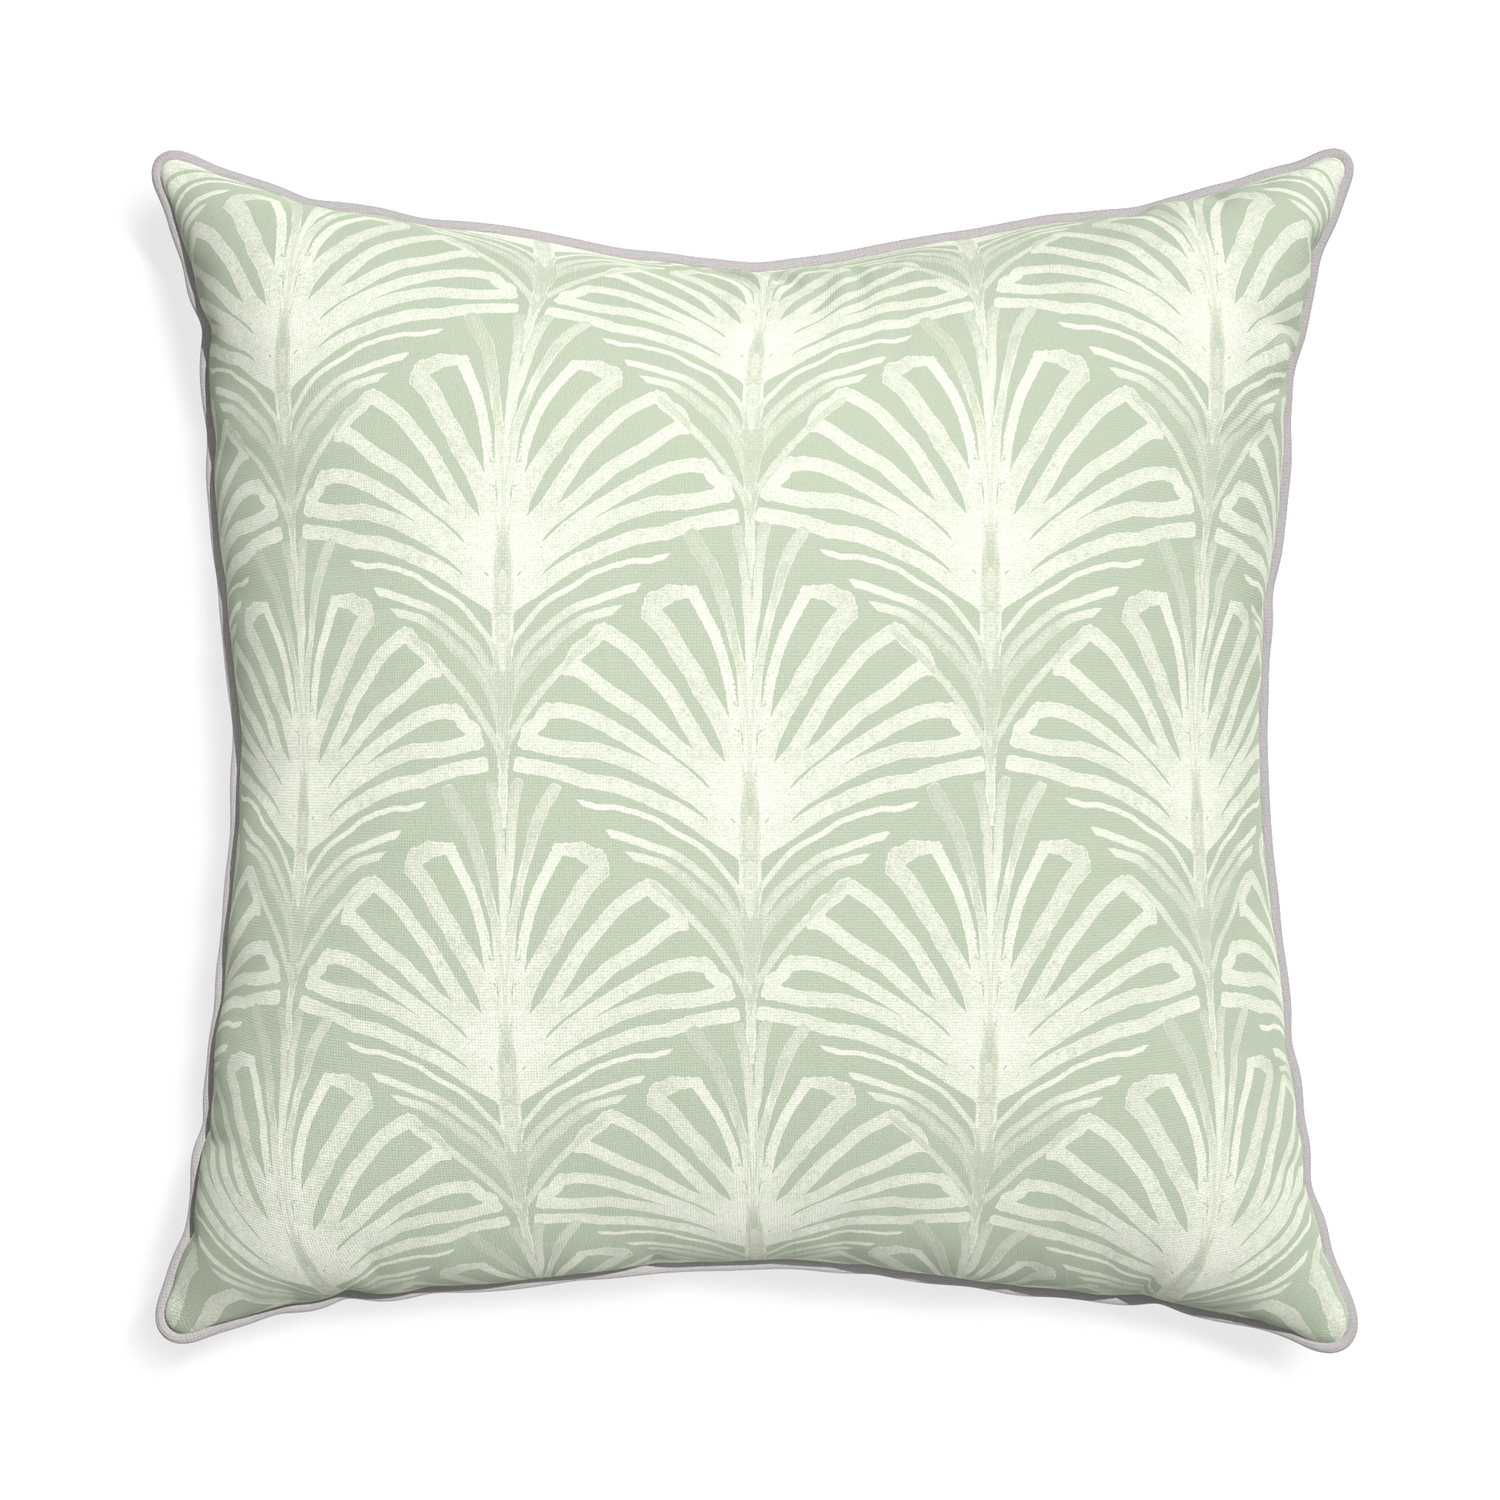 Euro-sham suzy sage custom pillow with pebble piping on white background